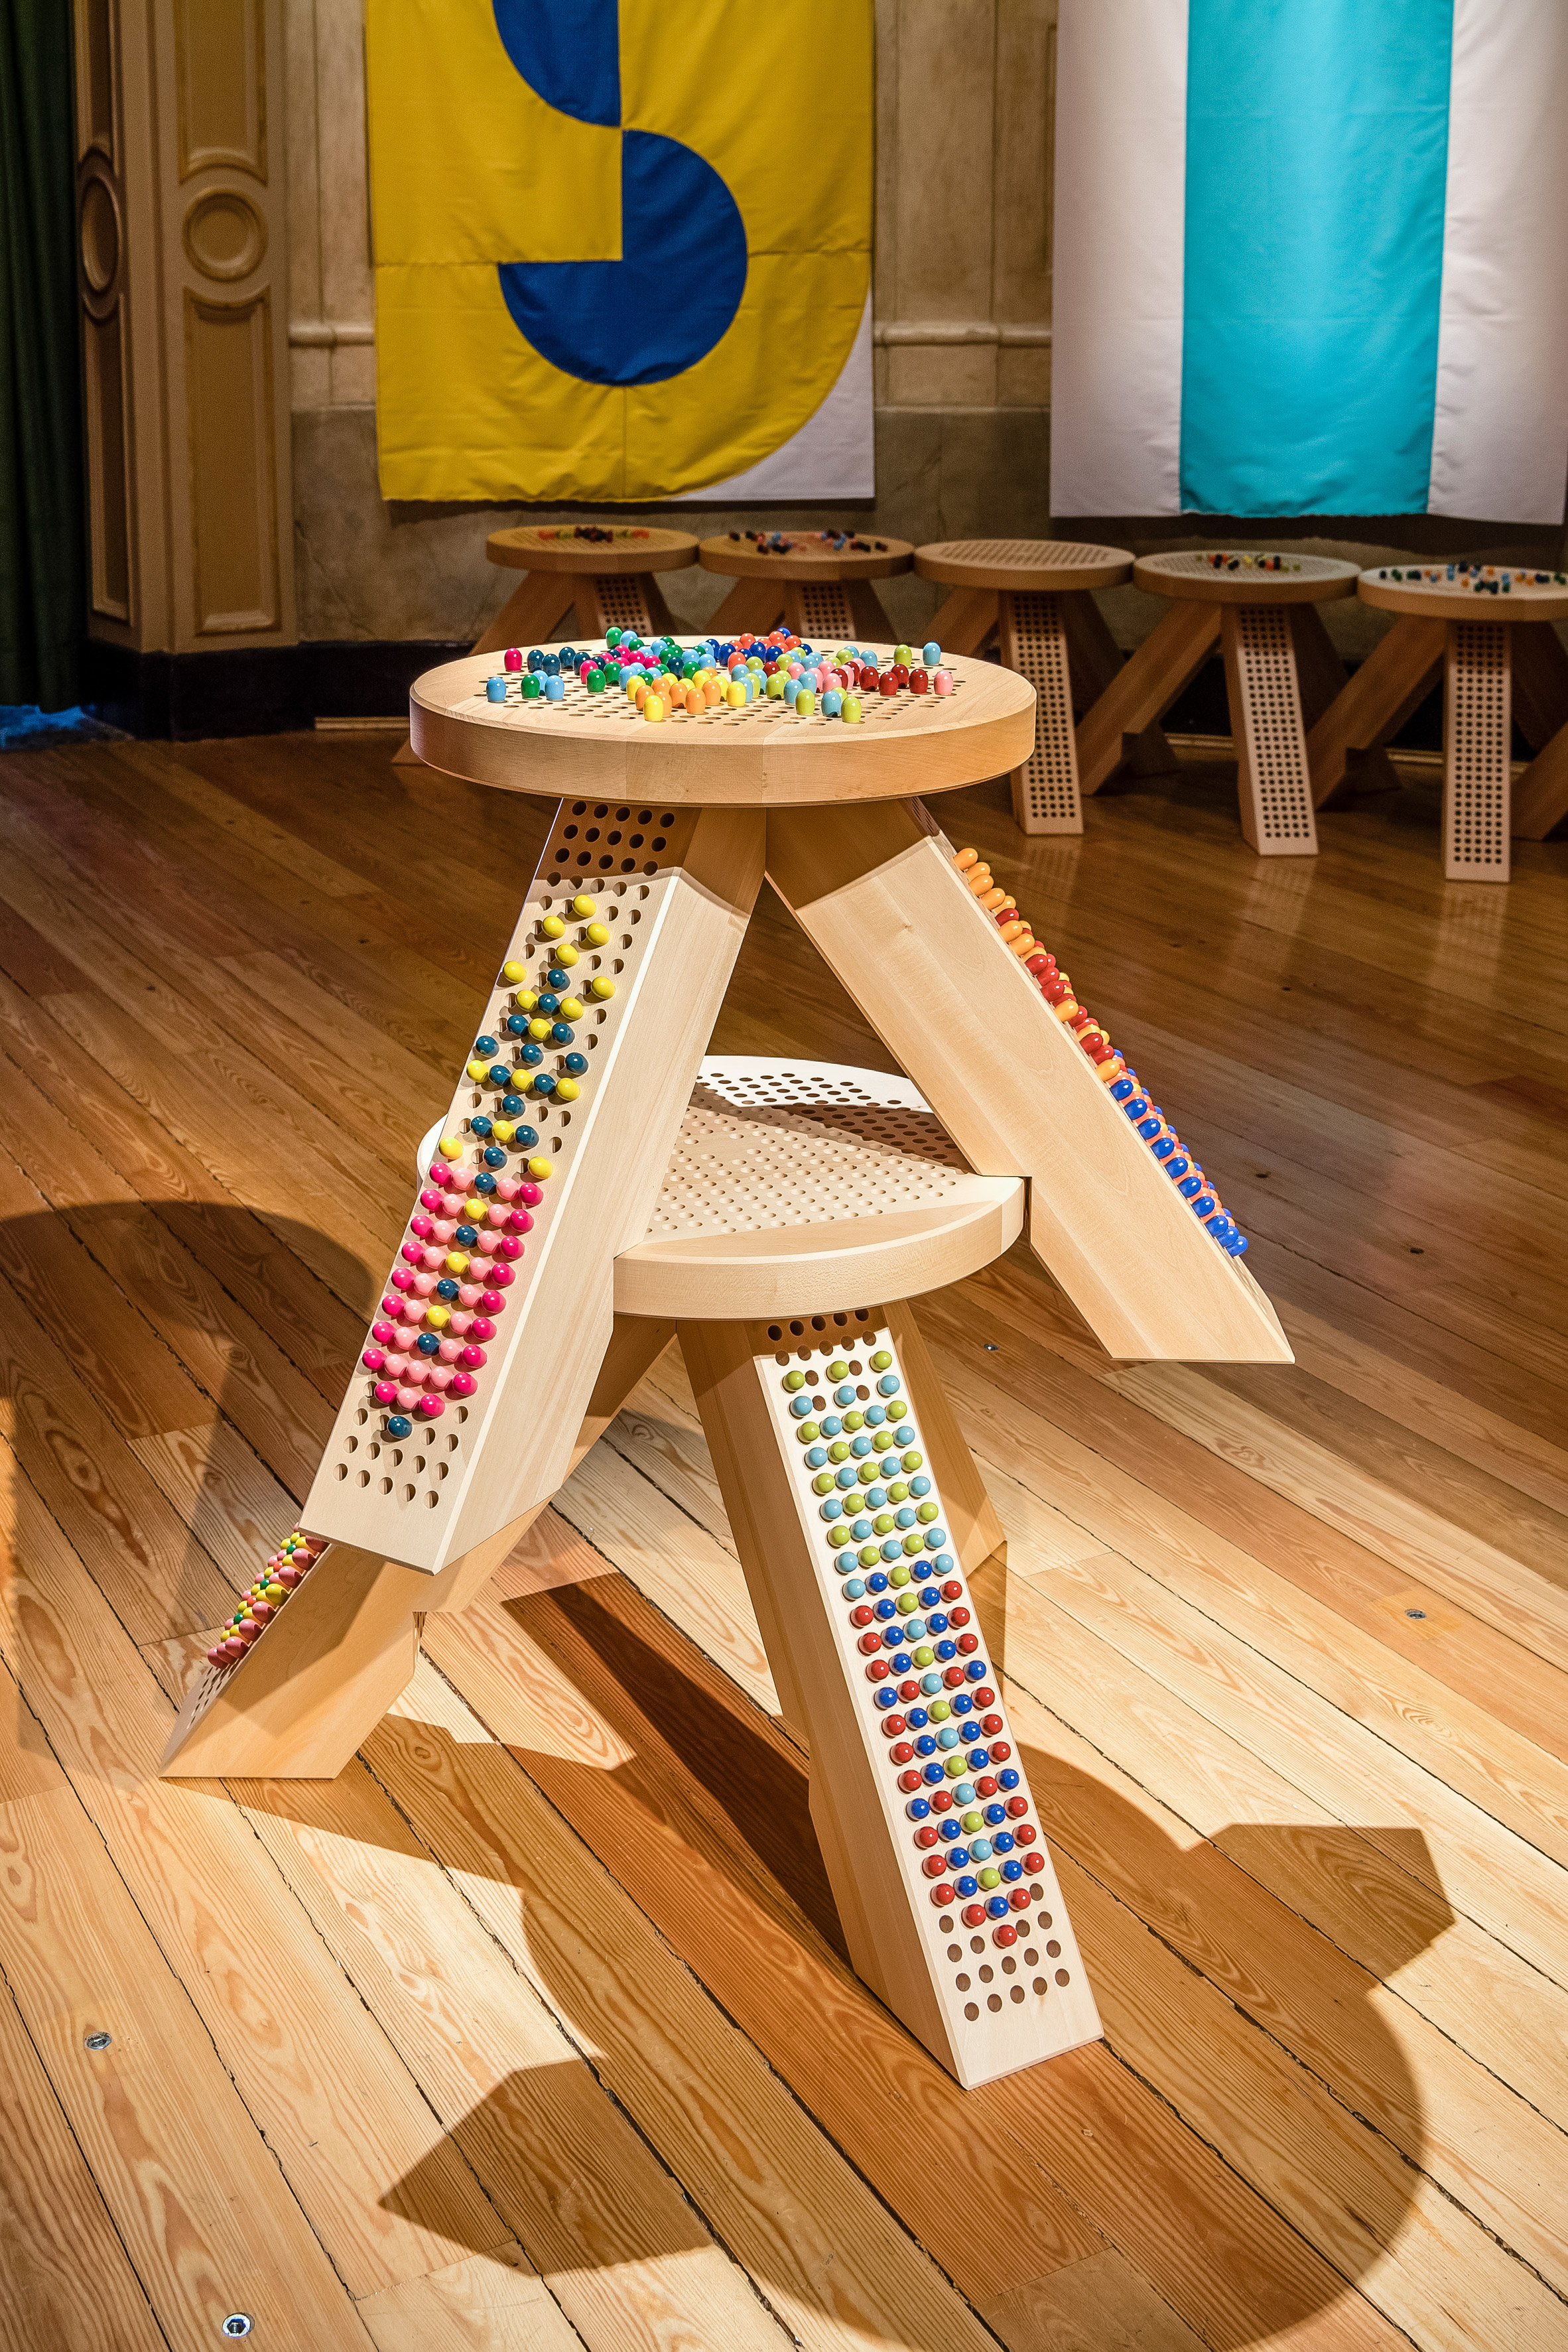 Miu Miu's M/Matching Colorstool is a "board game without rules"